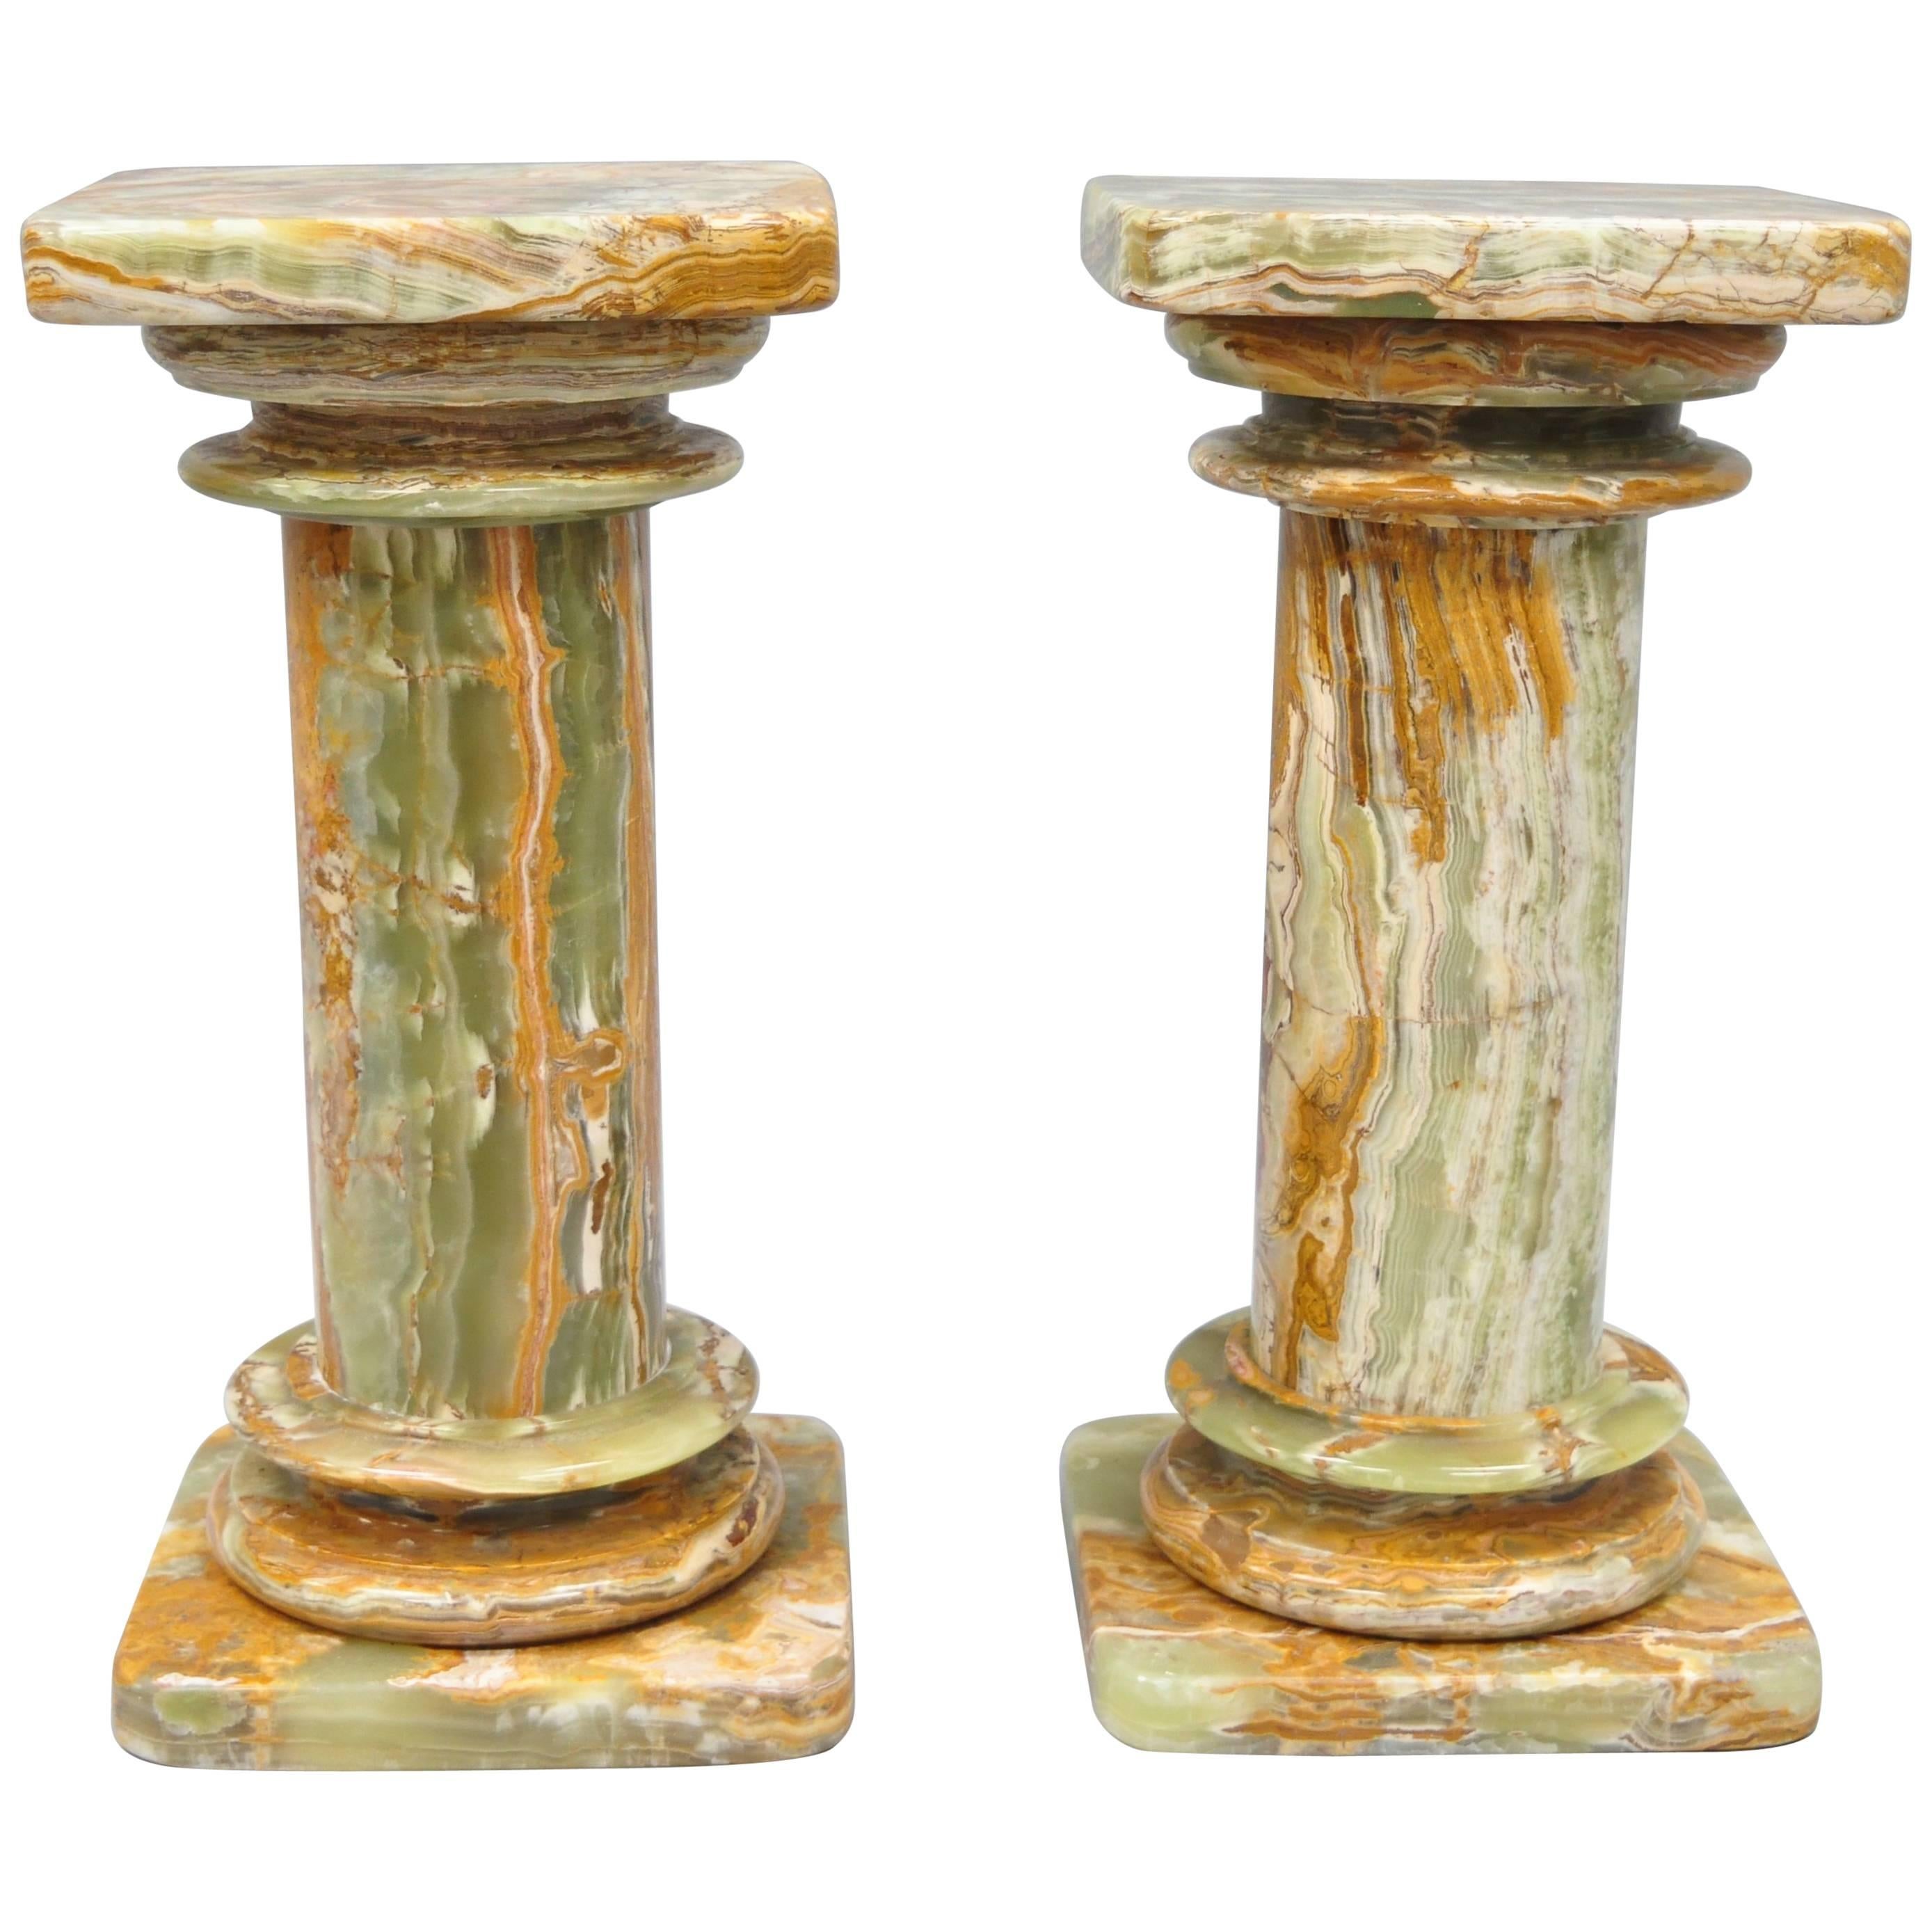 Pair of Low Italian Style Green Onyx Classical Column Pedestal Stand Side Tables